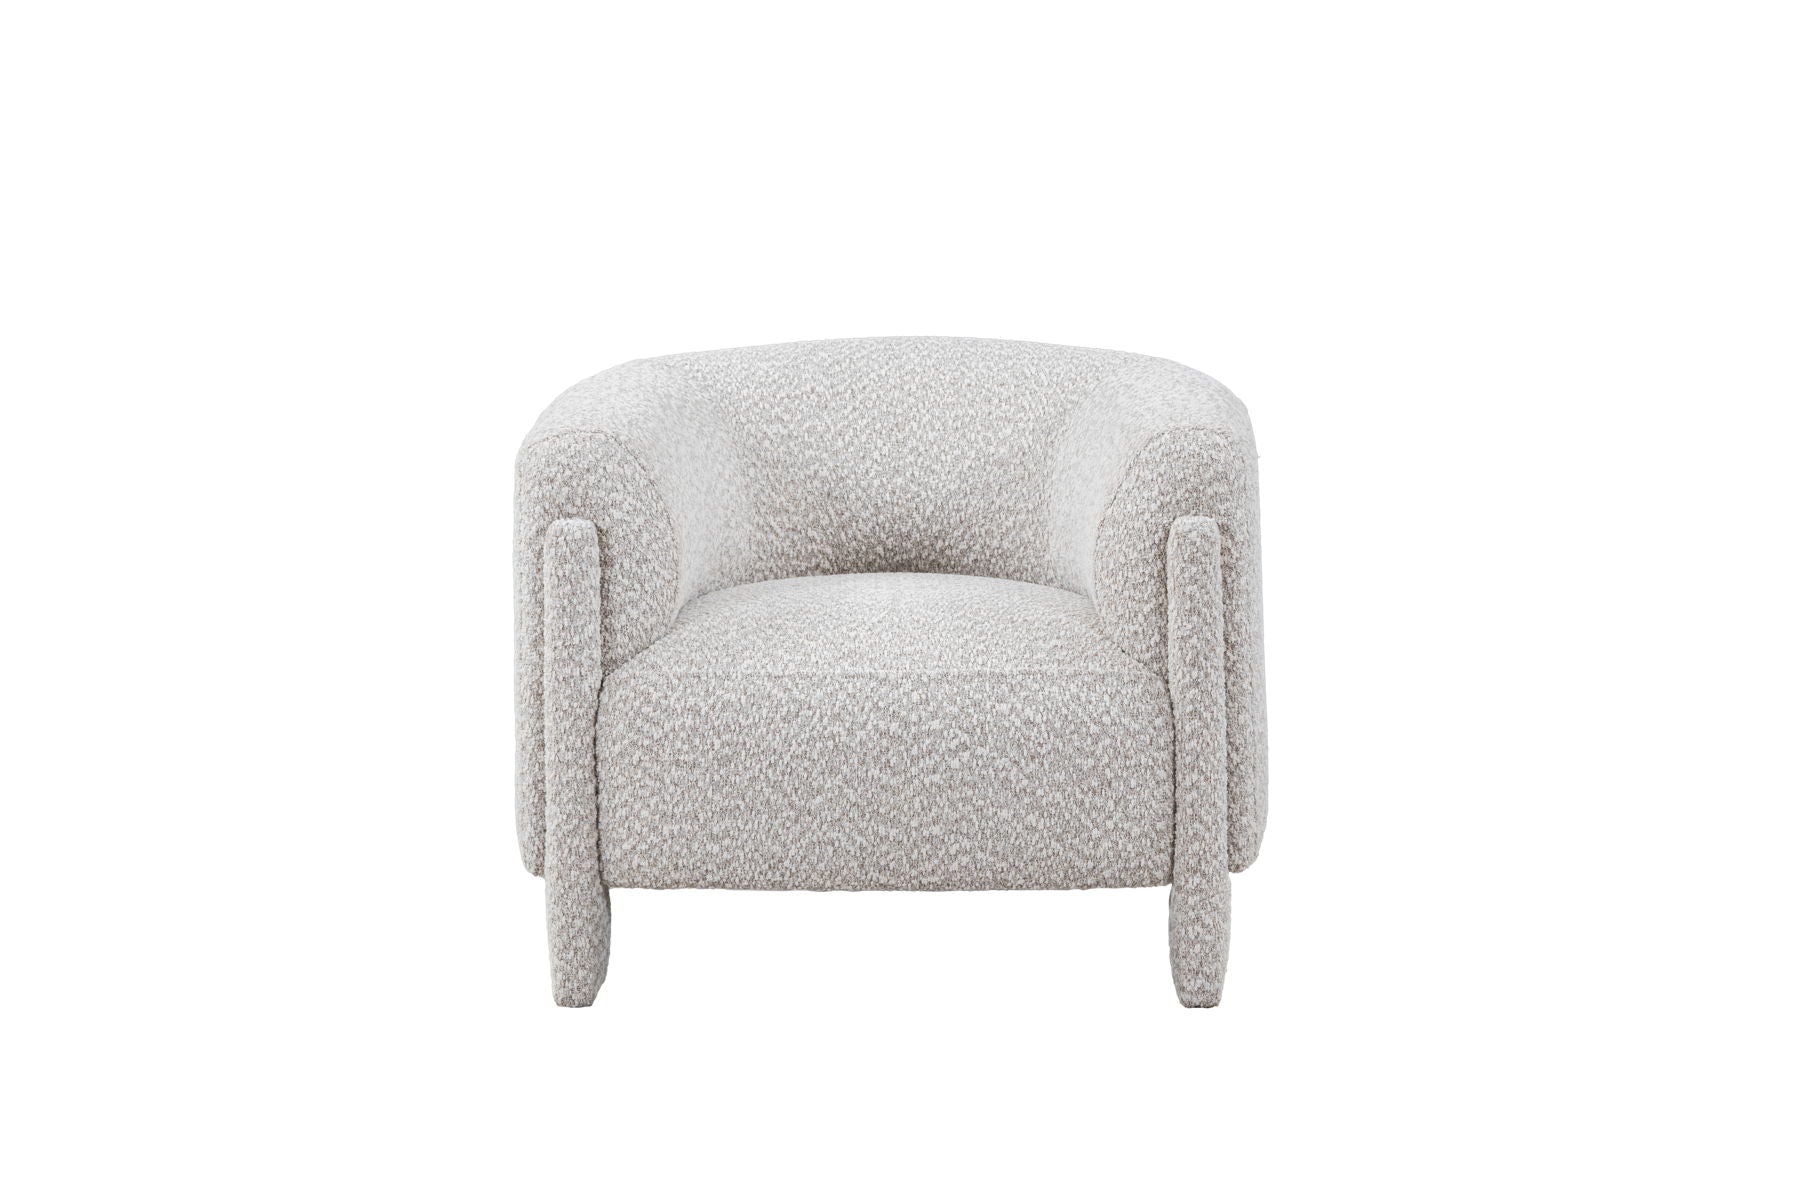 Leora - Upholstered Accent Chair - Glacier Gray